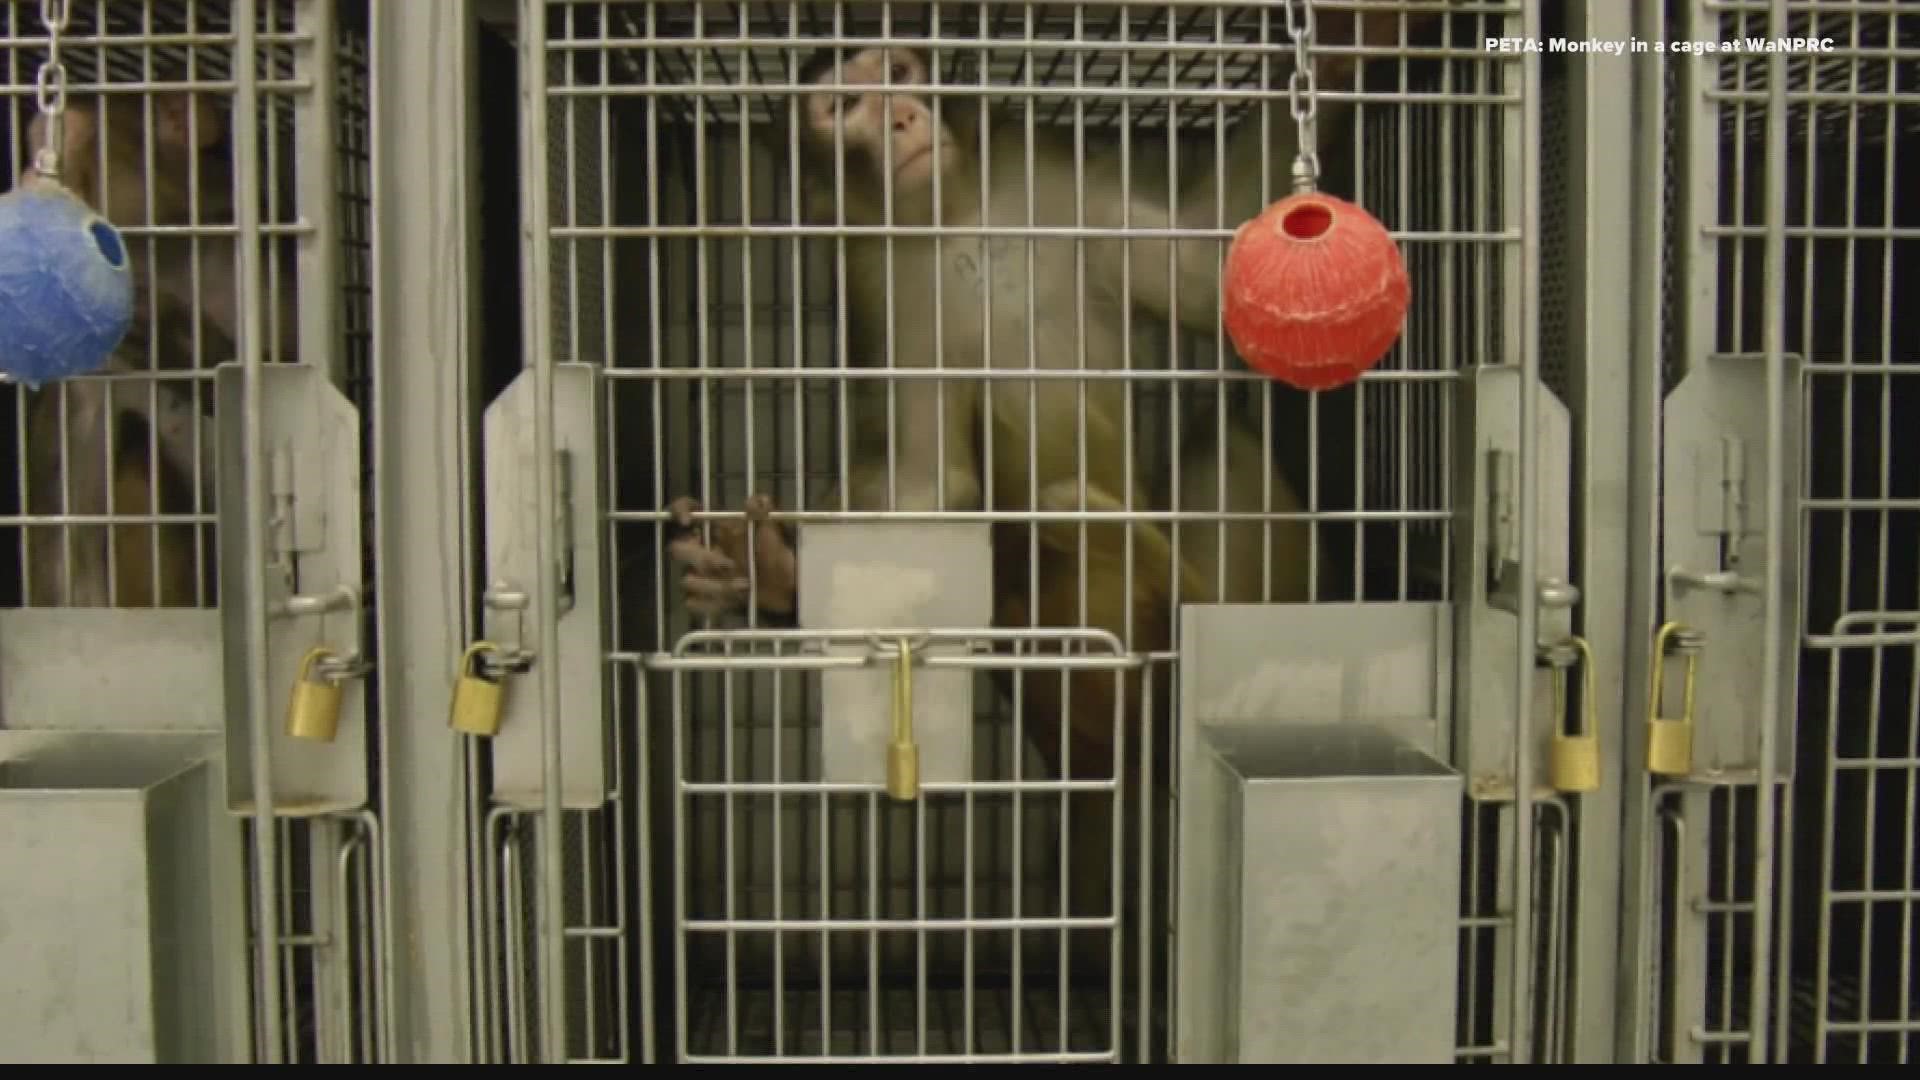 A Mesa monkey breeding and research facility is facing allegations of violations resulting in the deaths of dozens of monkeys. The facility is under investigation.